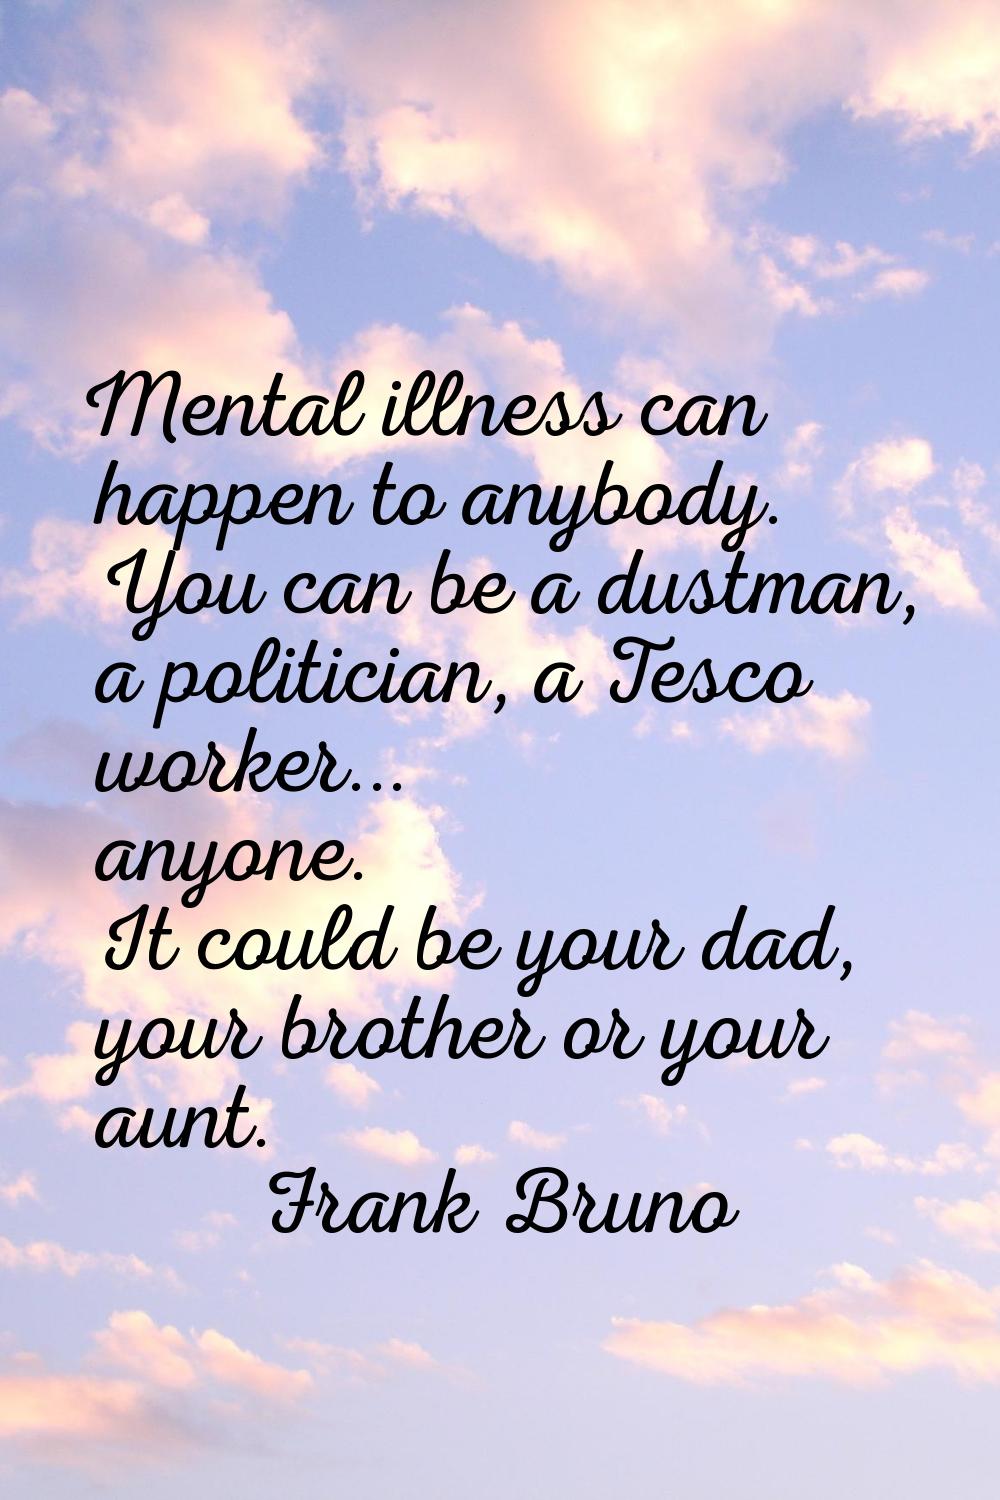 Mental illness can happen to anybody. You can be a dustman, a politician, a Tesco worker... anyone.